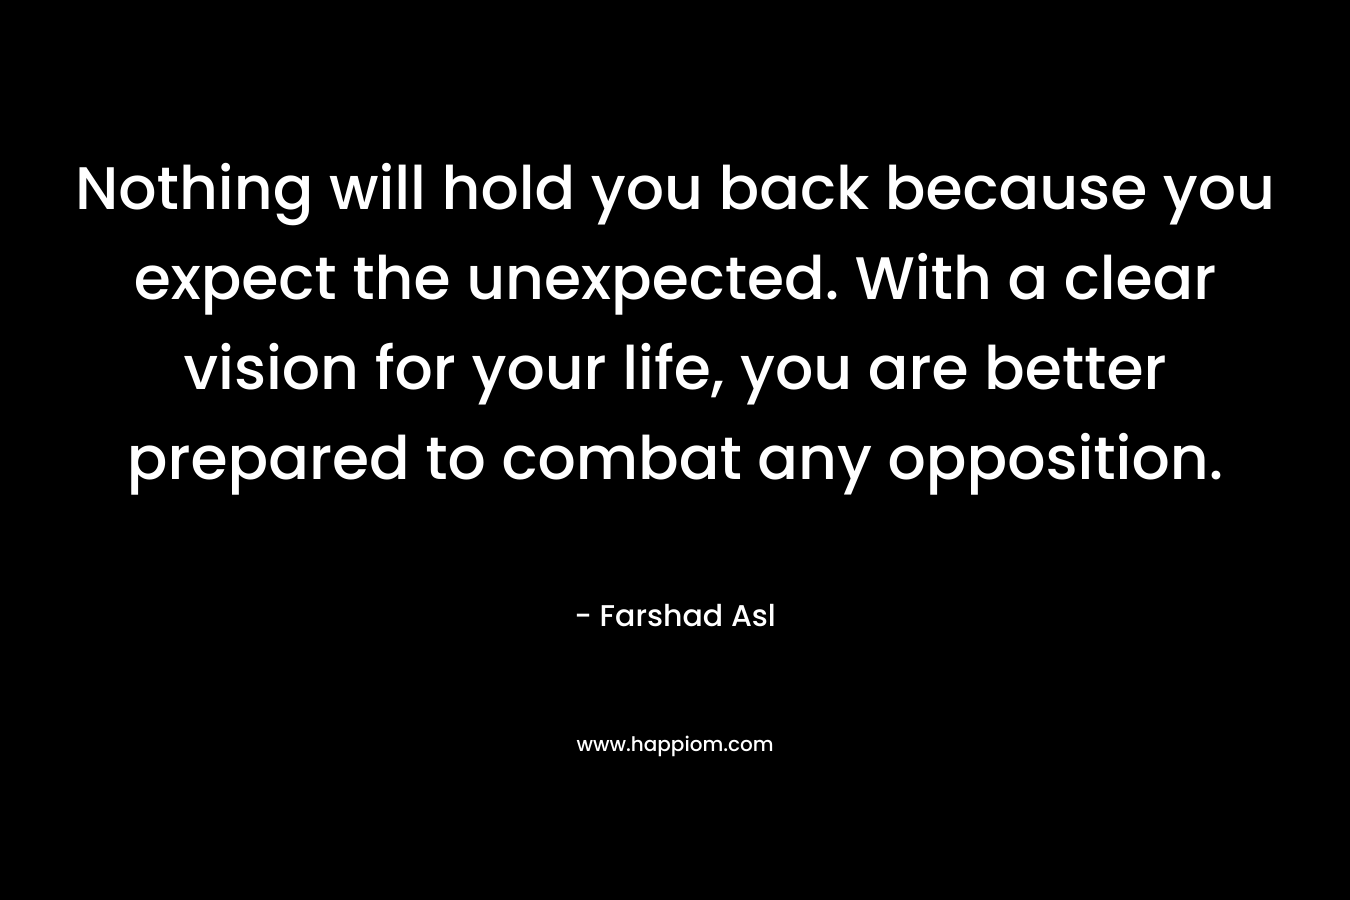 Nothing will hold you back because you expect the unexpected. With a clear vision for your life, you are better prepared to combat any opposition.